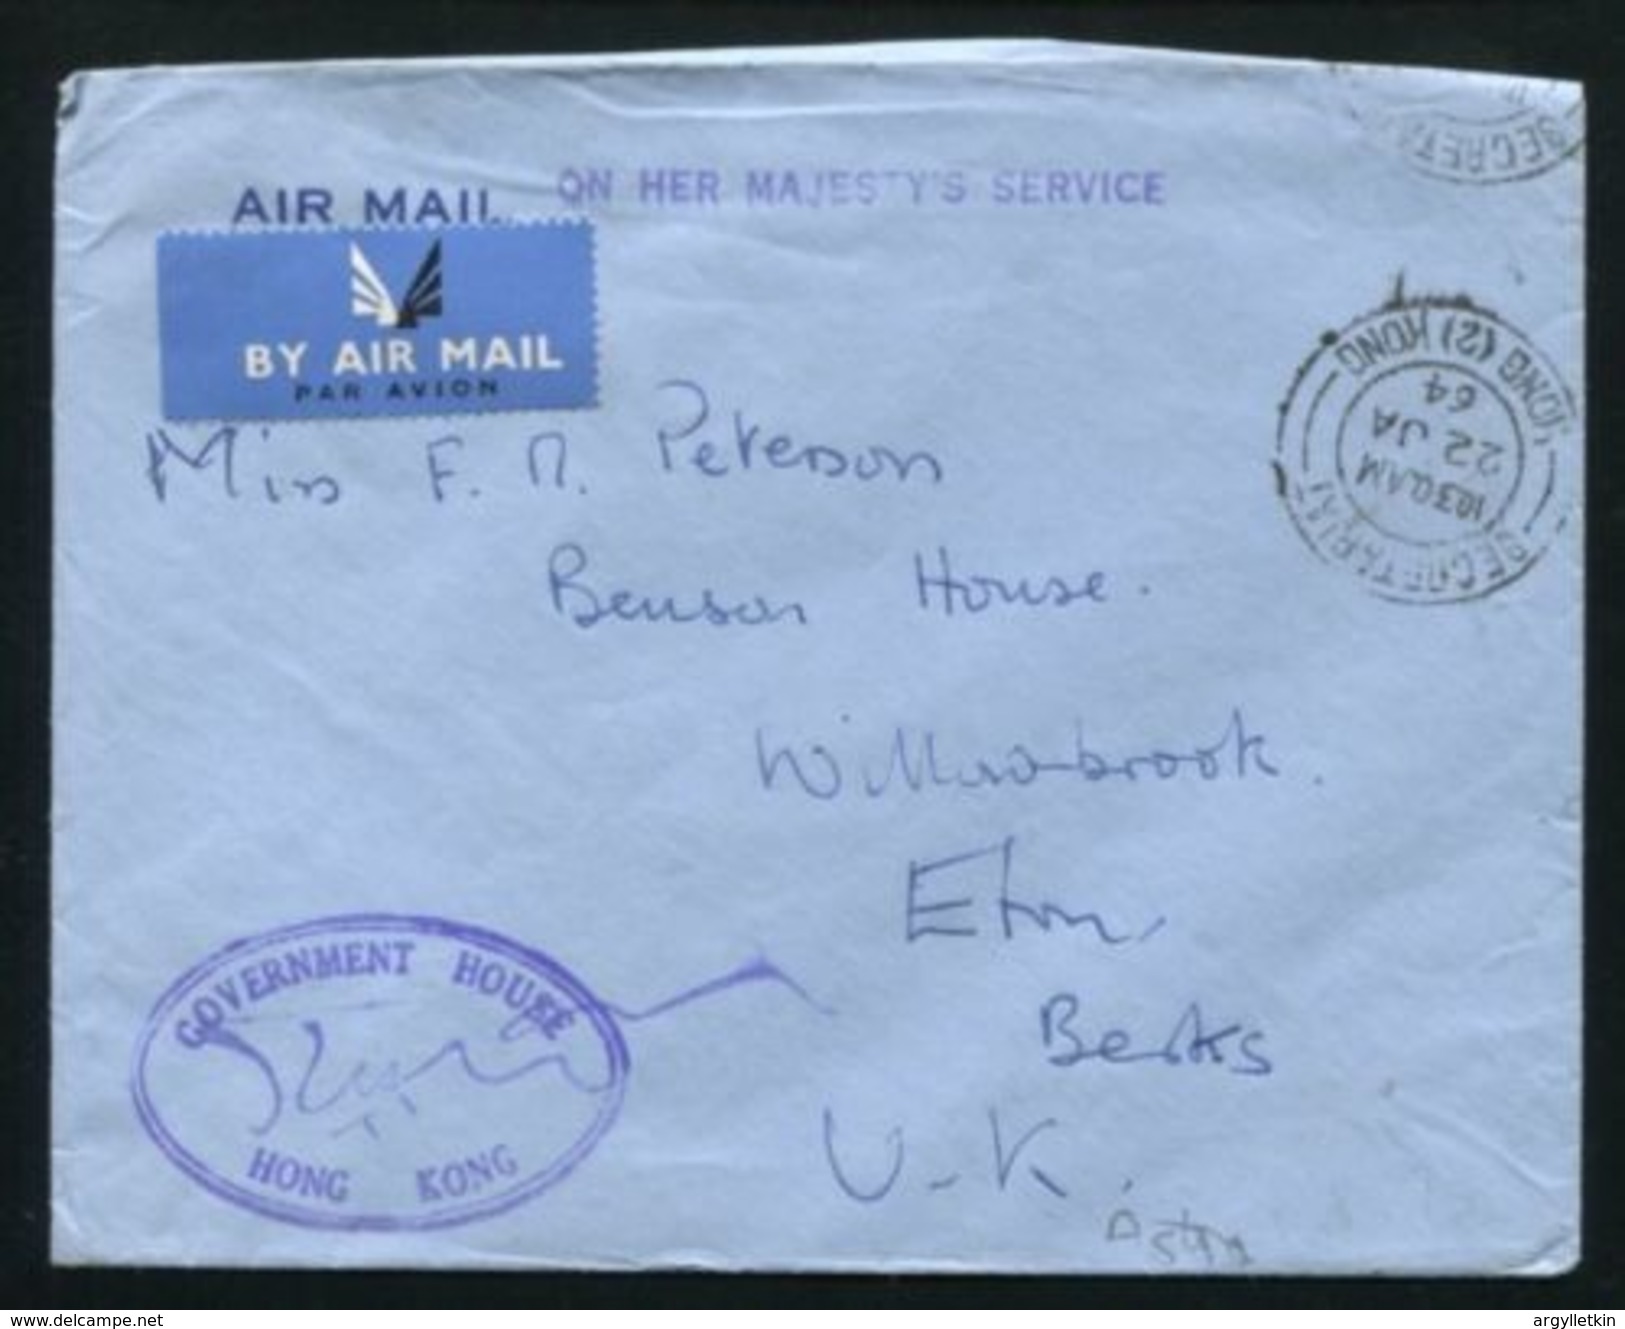 HONG KONG OHMS GOVERNMENT HOUSE ON ASTRA AIRMAIL ENVELOPE 1964 - Cartas & Documentos